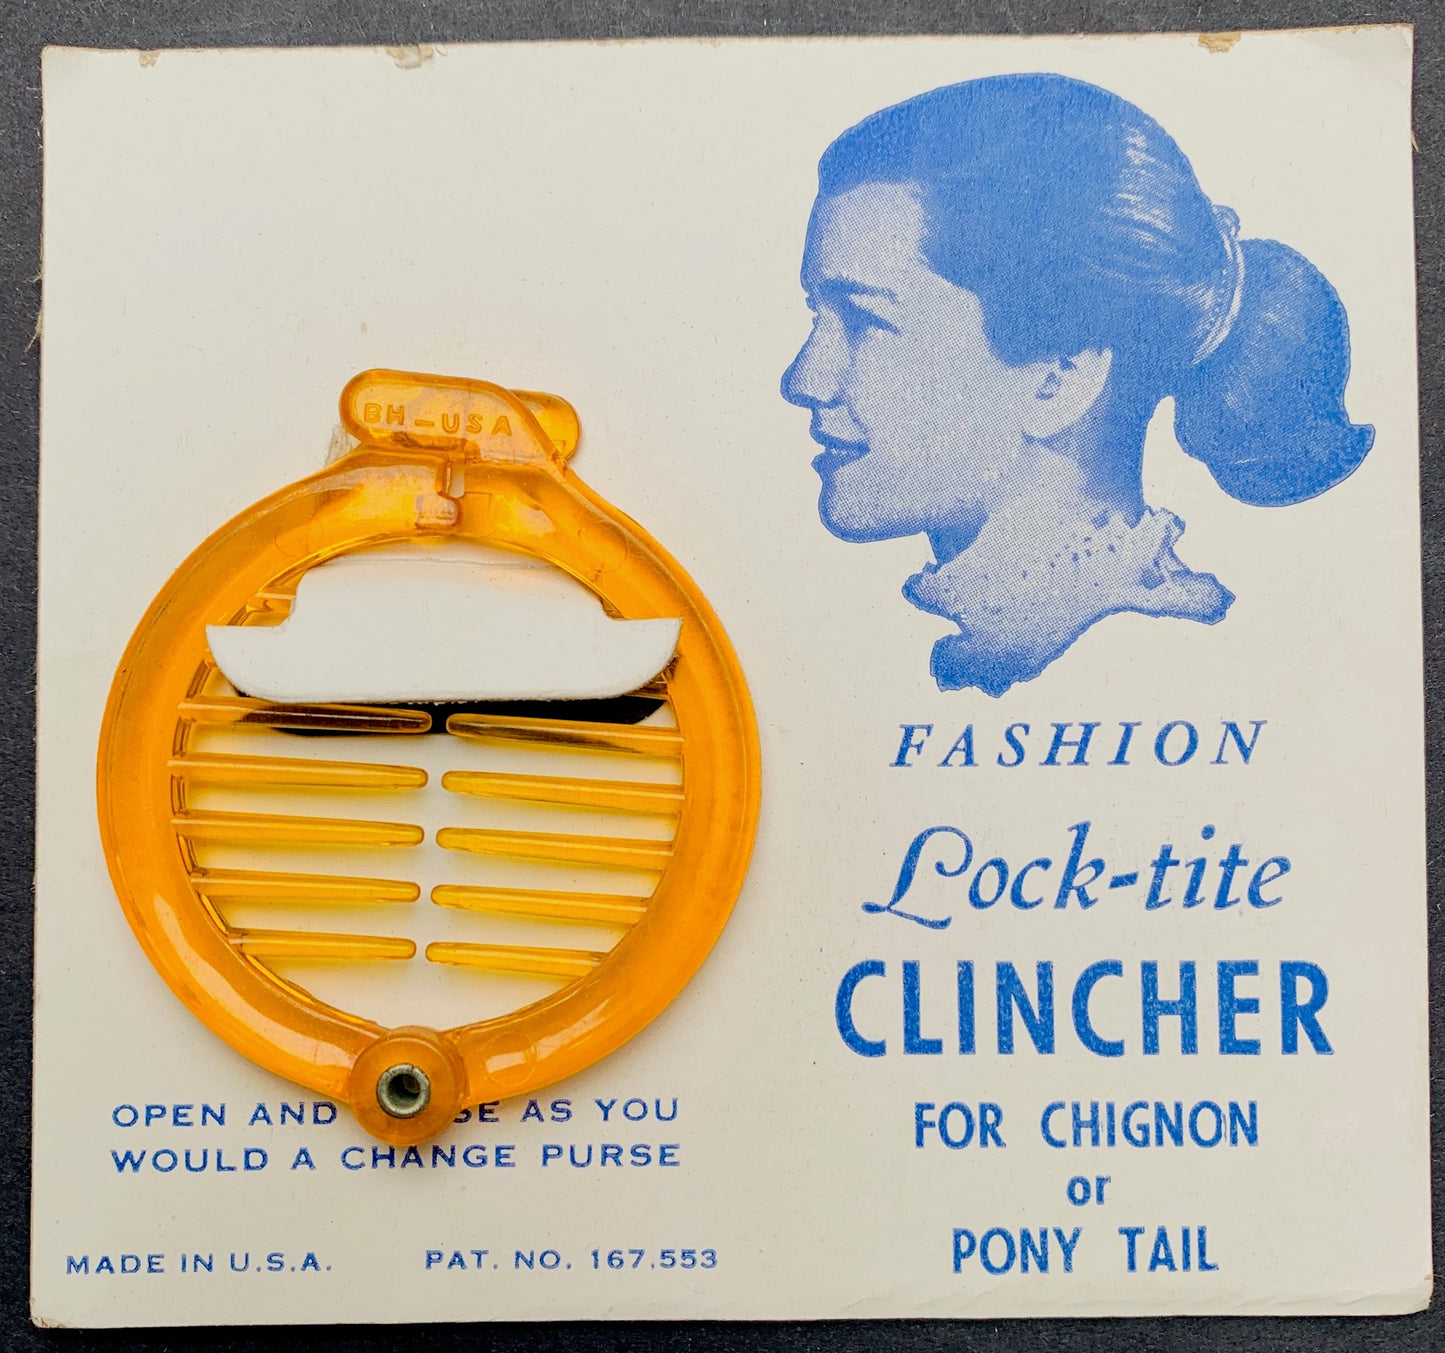 1950s "Lock-tite CLINCHER" Ring Grip for Chignon or Pony Tail